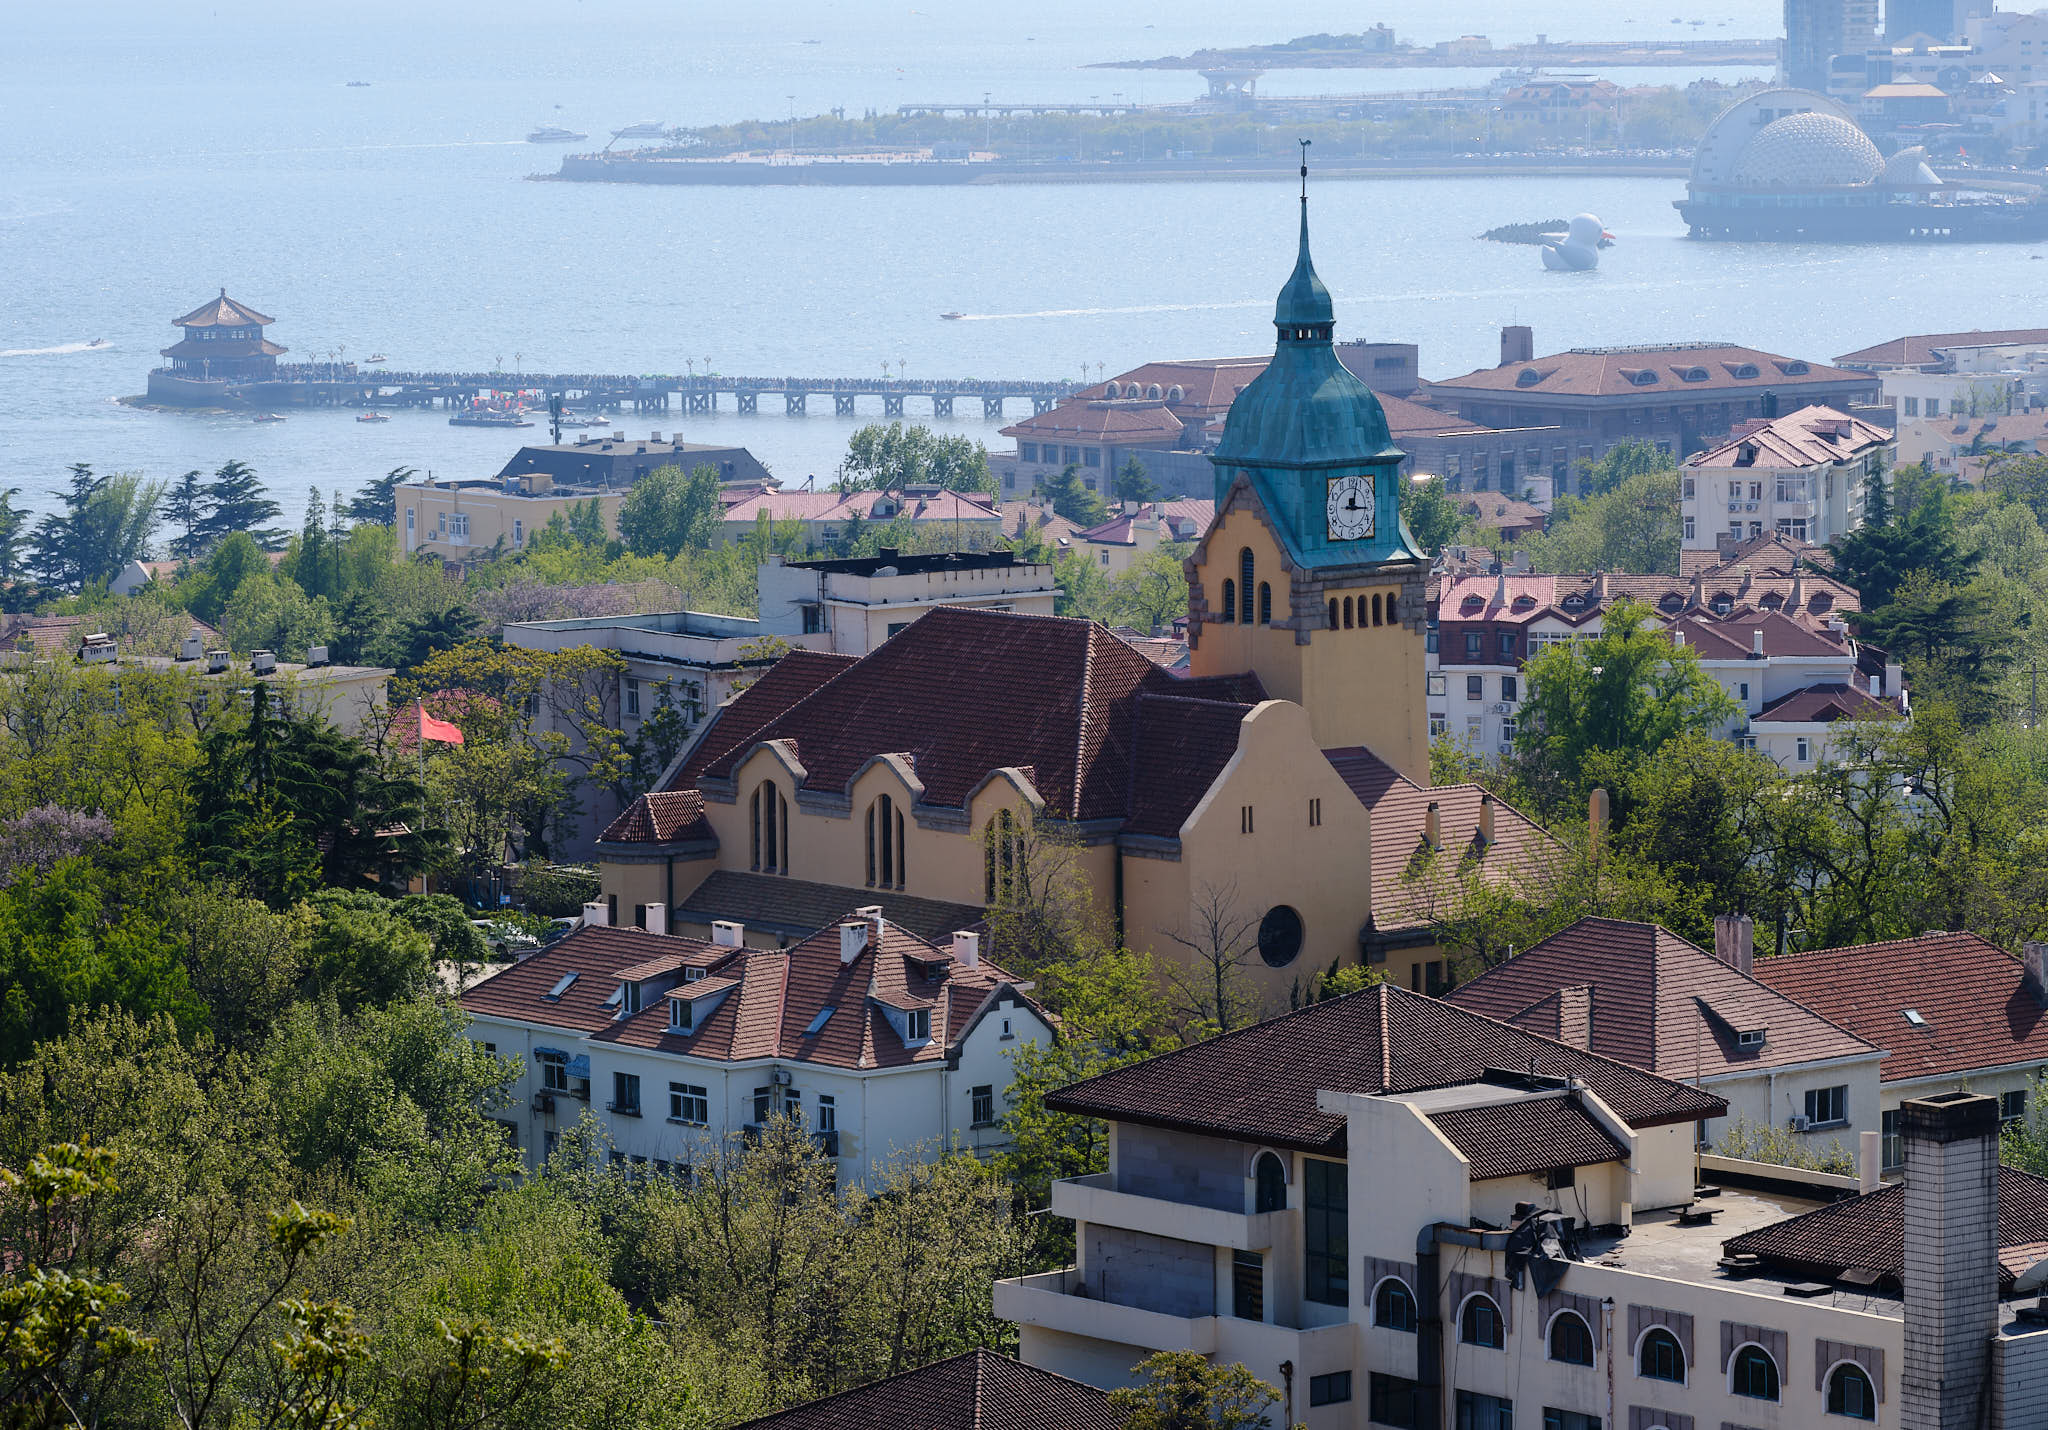 View of Christ Church in Qingdao from Signal Hill